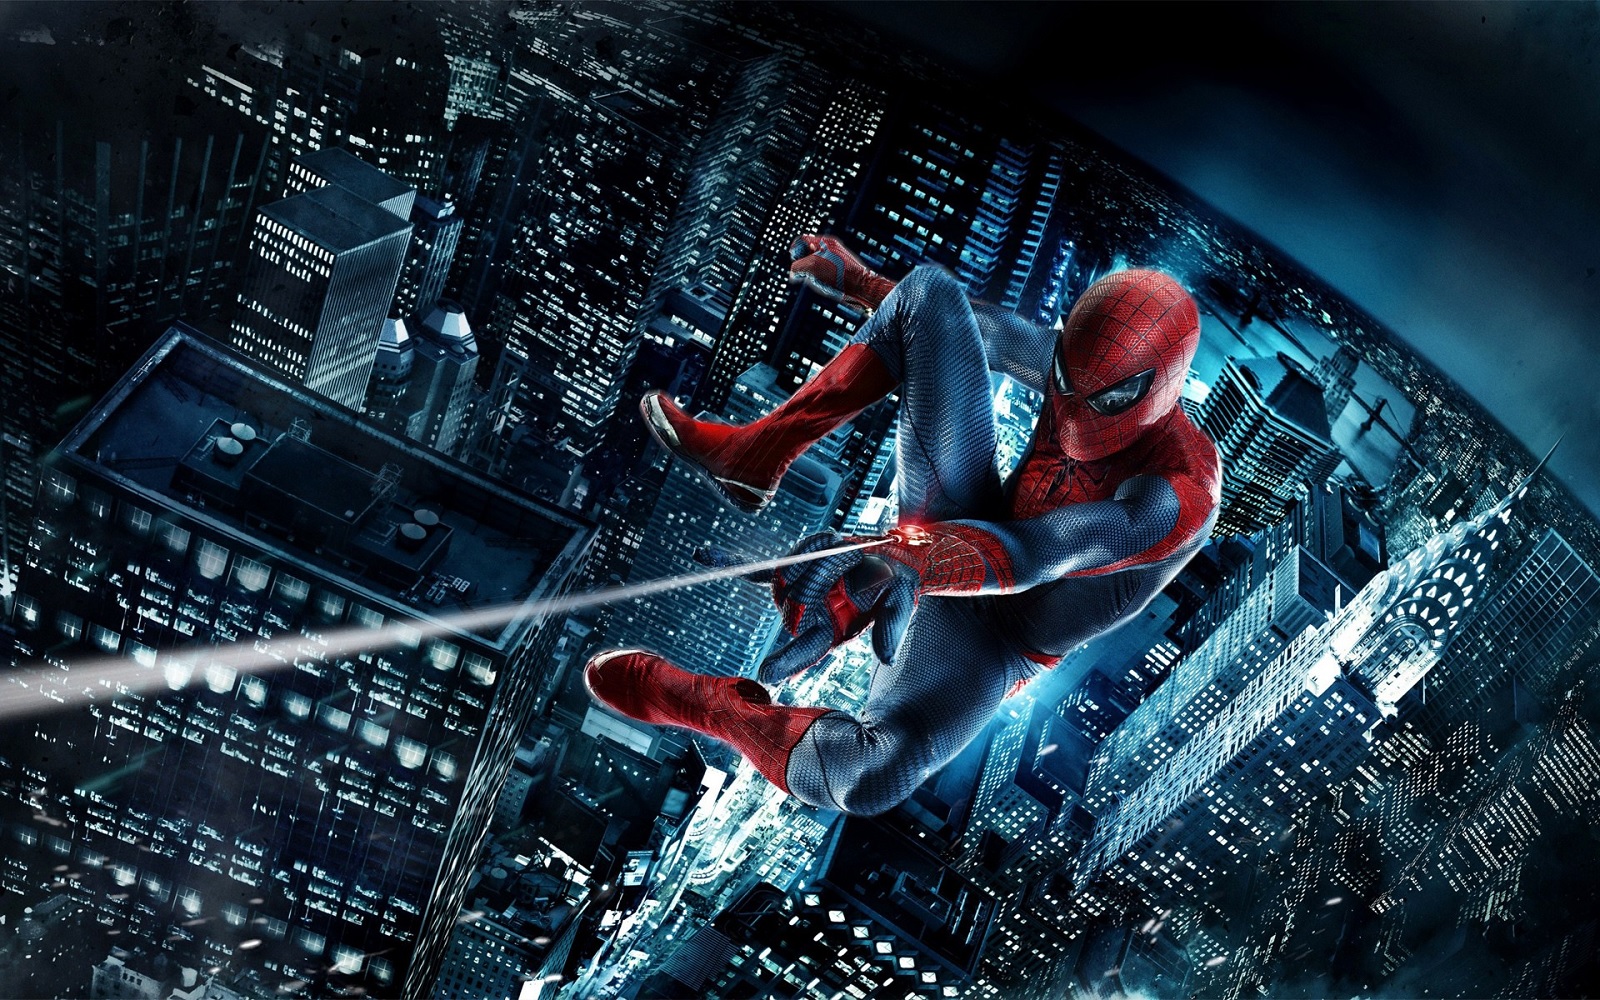 Spiderman Web Shooter HD Spiderman Wallpapers  HD Wallpapers  ID 64788